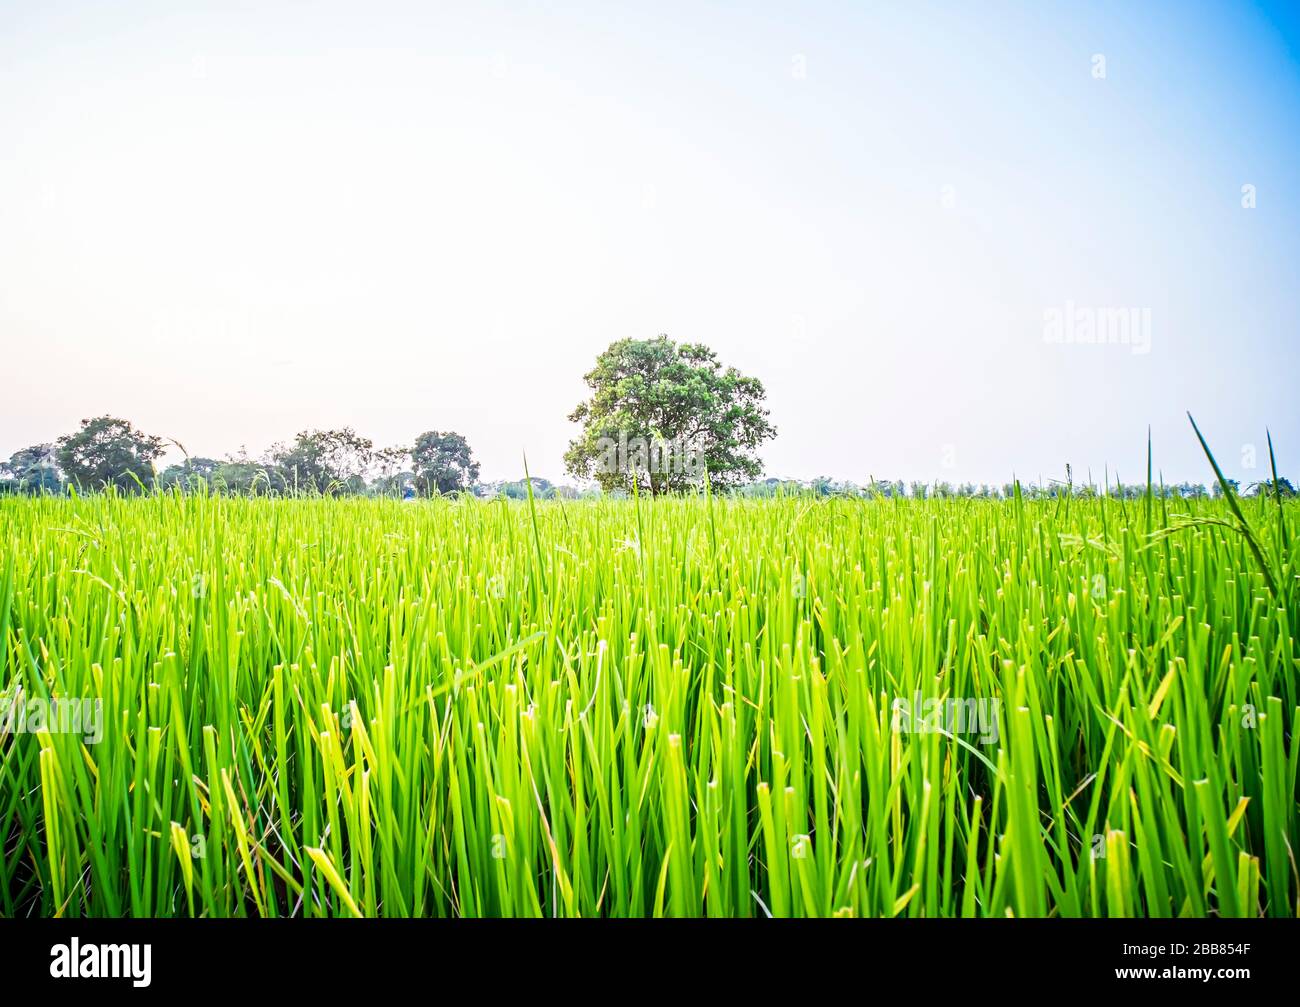 Beautiful scenery of green paddy field with big tree in rural area Thailand  Stock Photo - Alamy